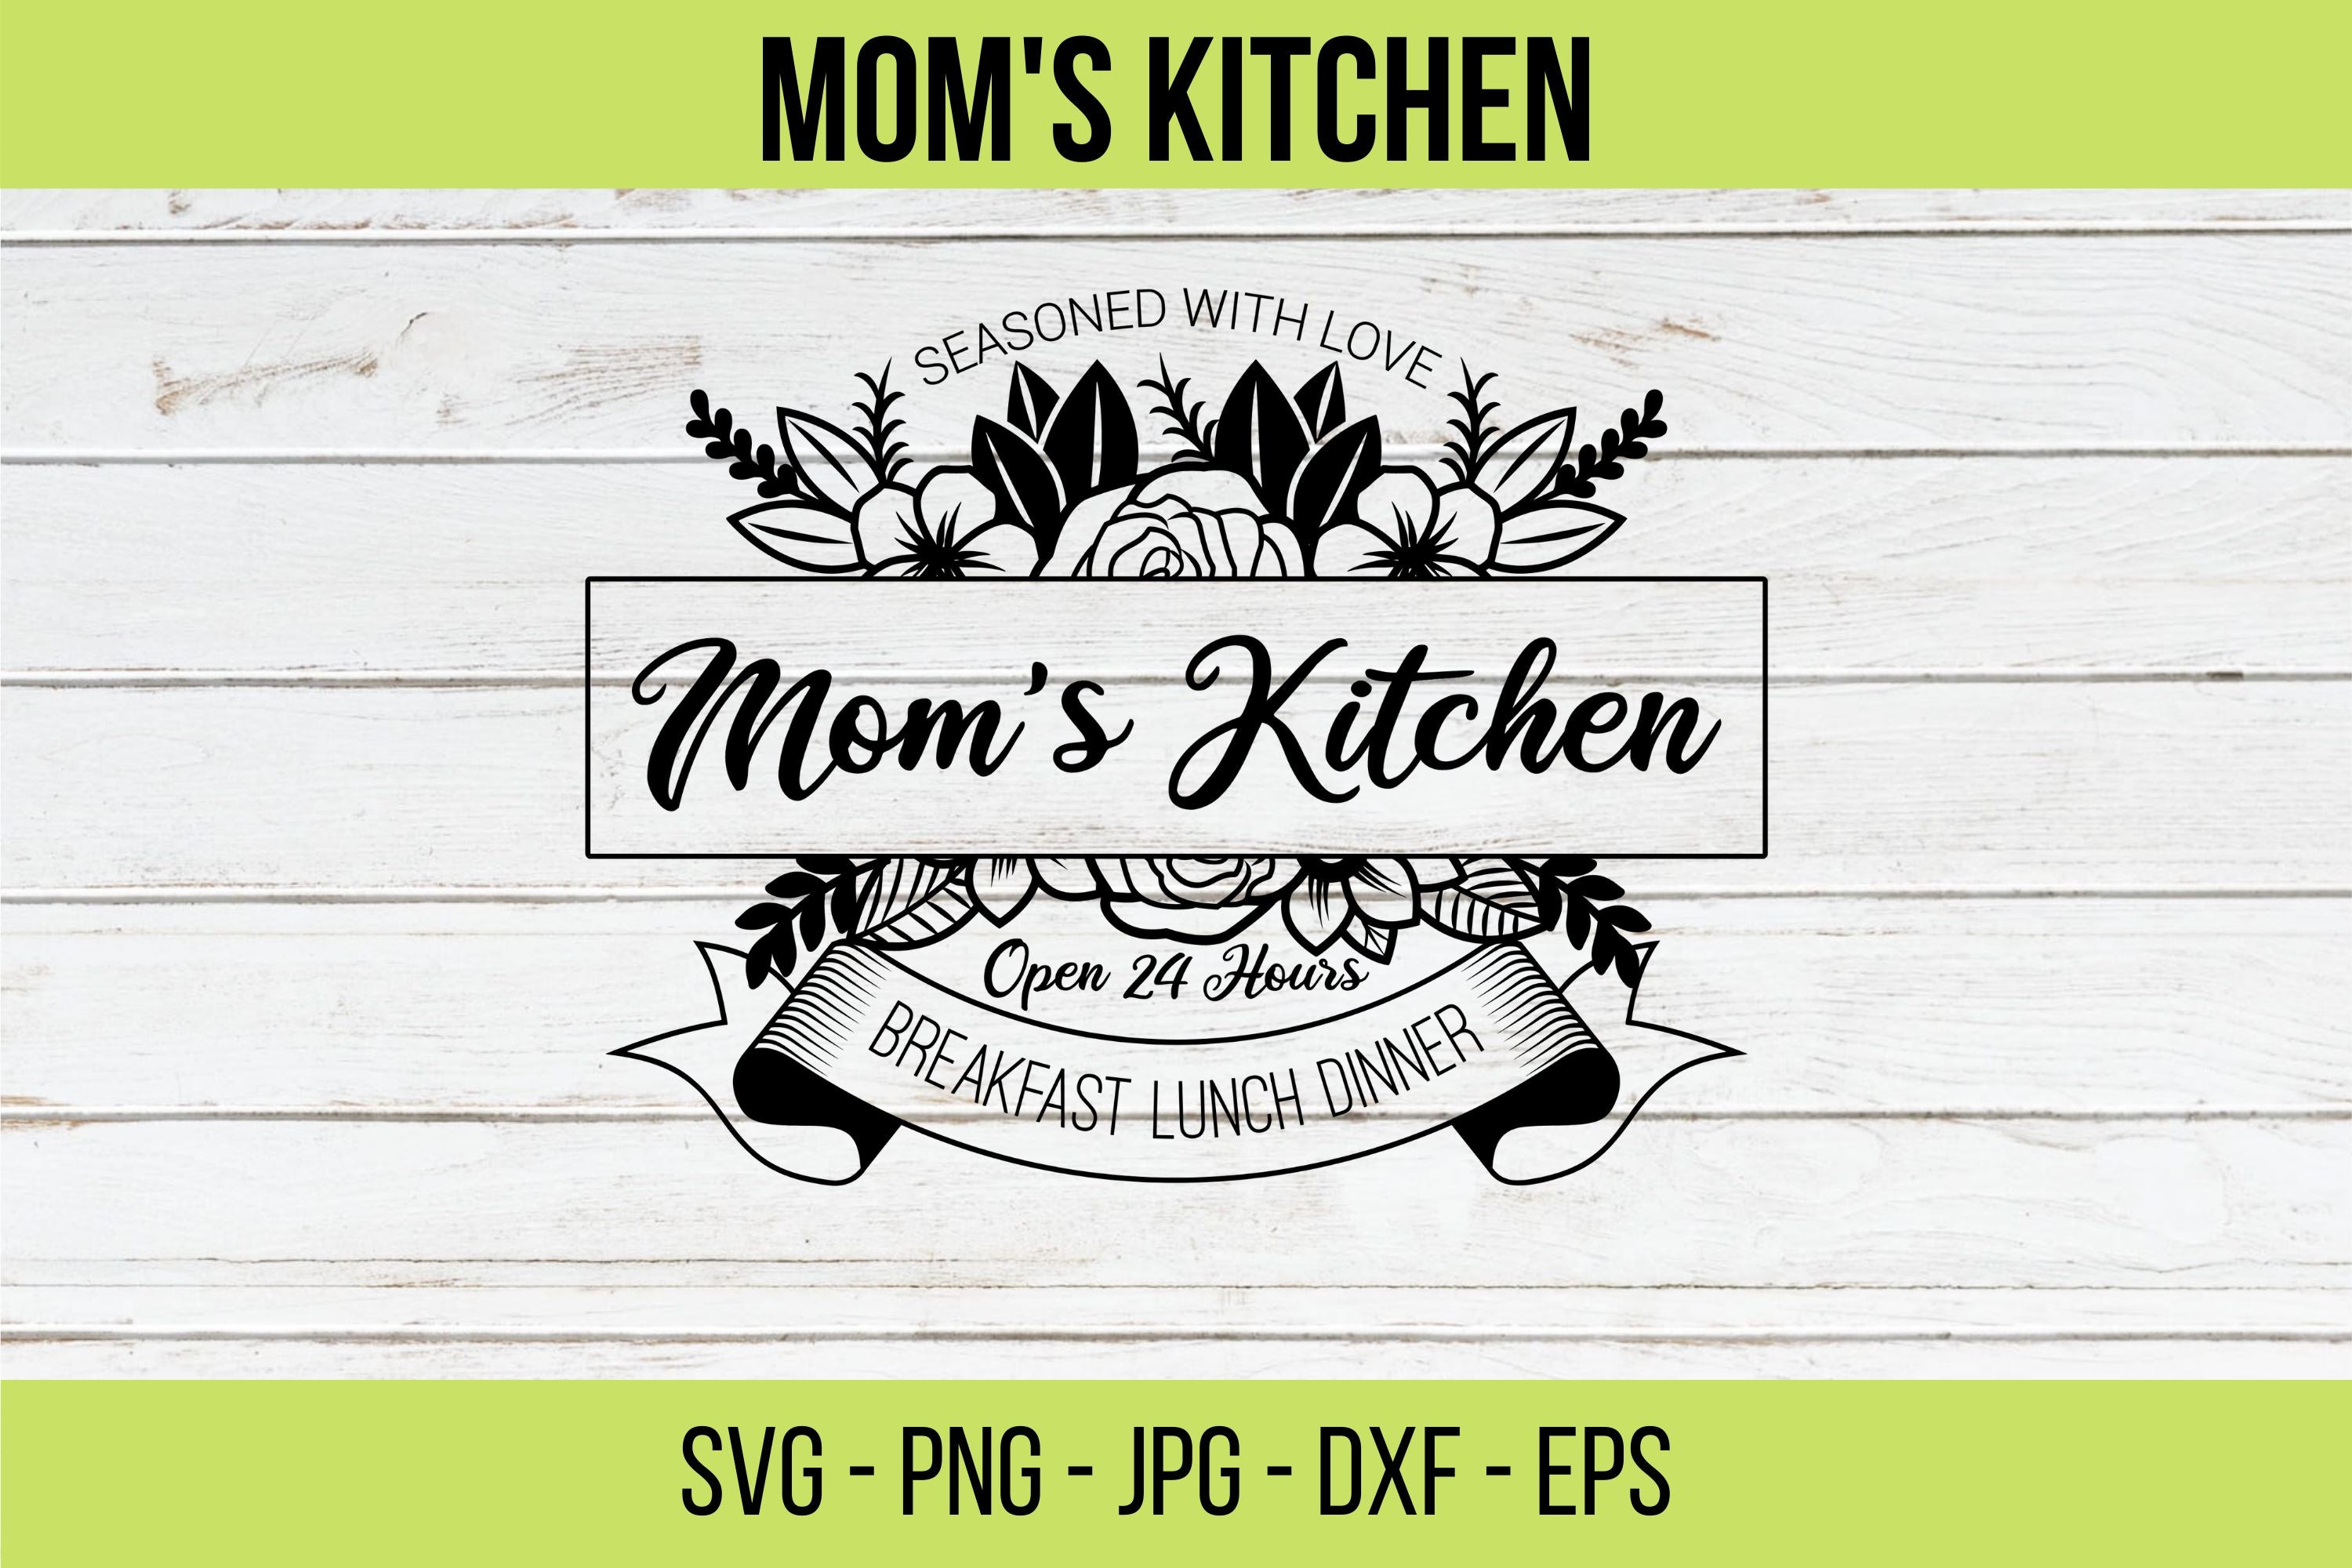 Kitchen Quotes & Sayings (Free Clipart & Cricut Designs) – DIY Projects,  Patterns, Monograms, Designs, Templates